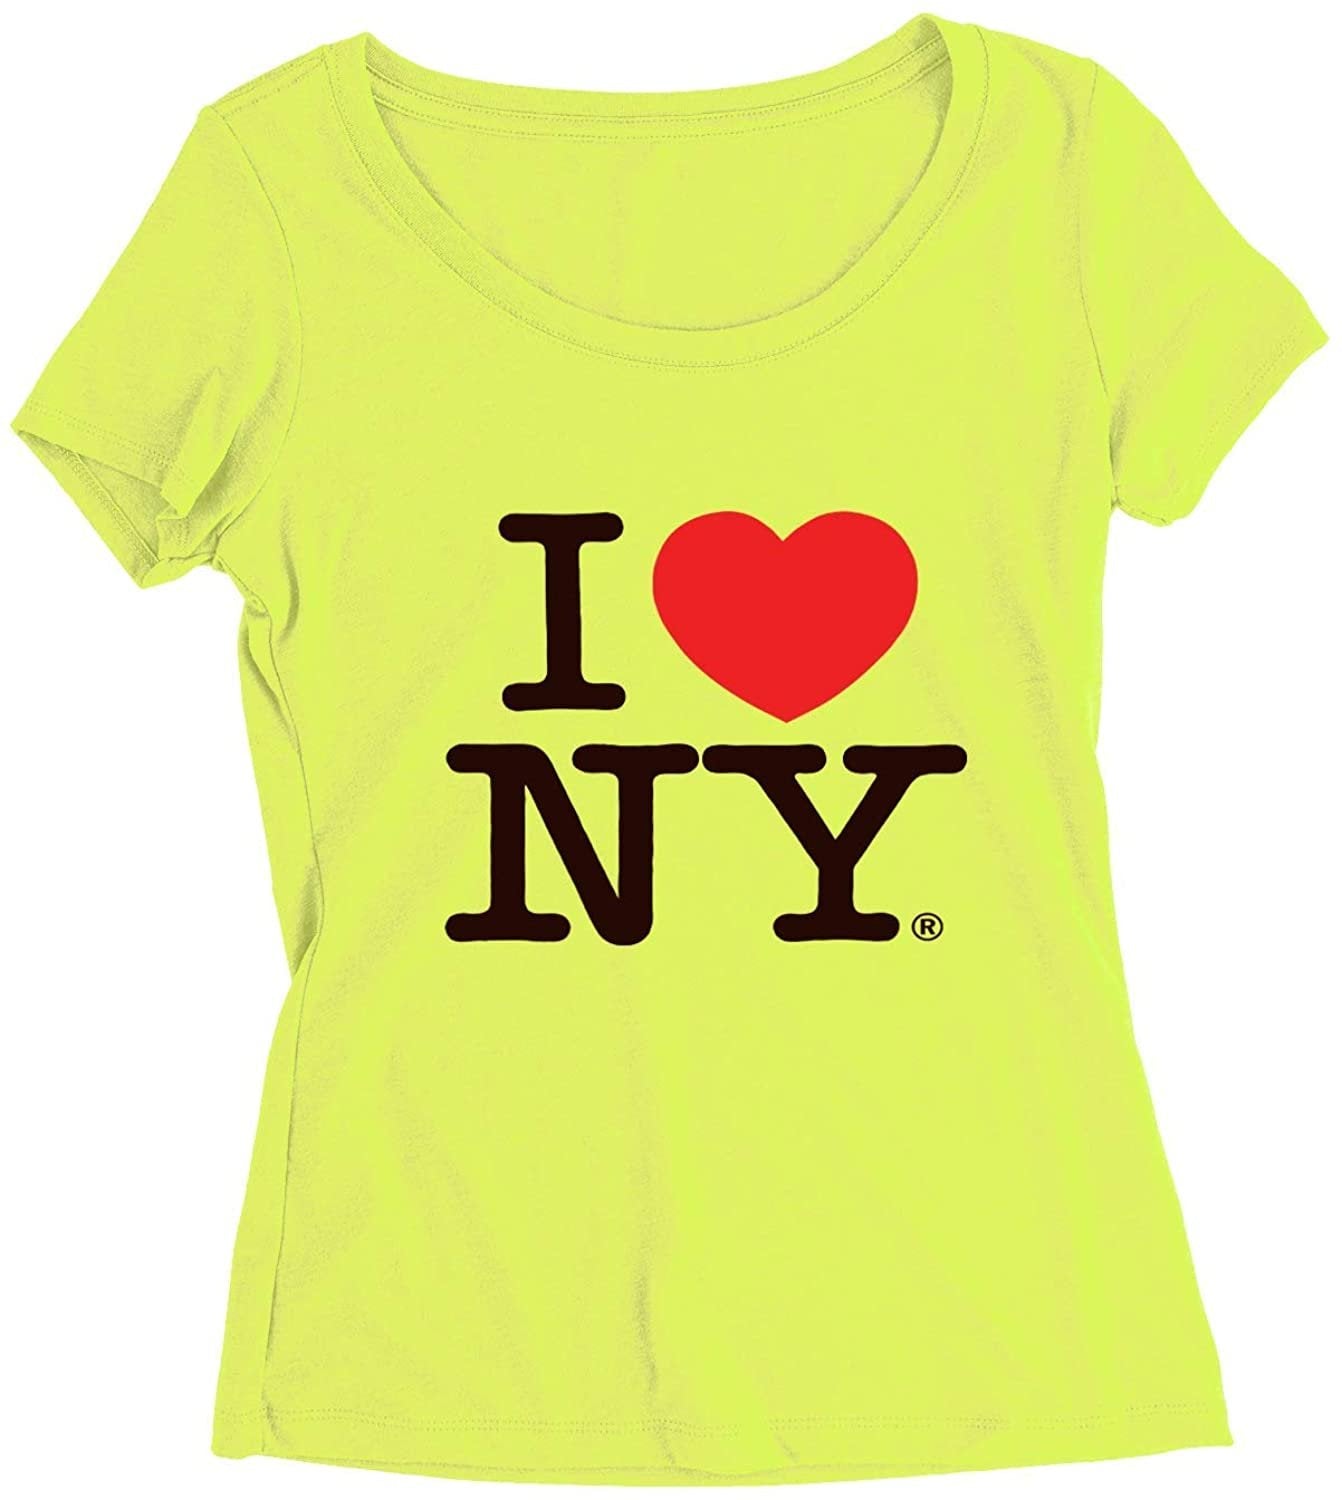 I Love NY Neon Teens/Ladies Scoop Neck T-Shirt Tee Officially Licensed Slim Fit